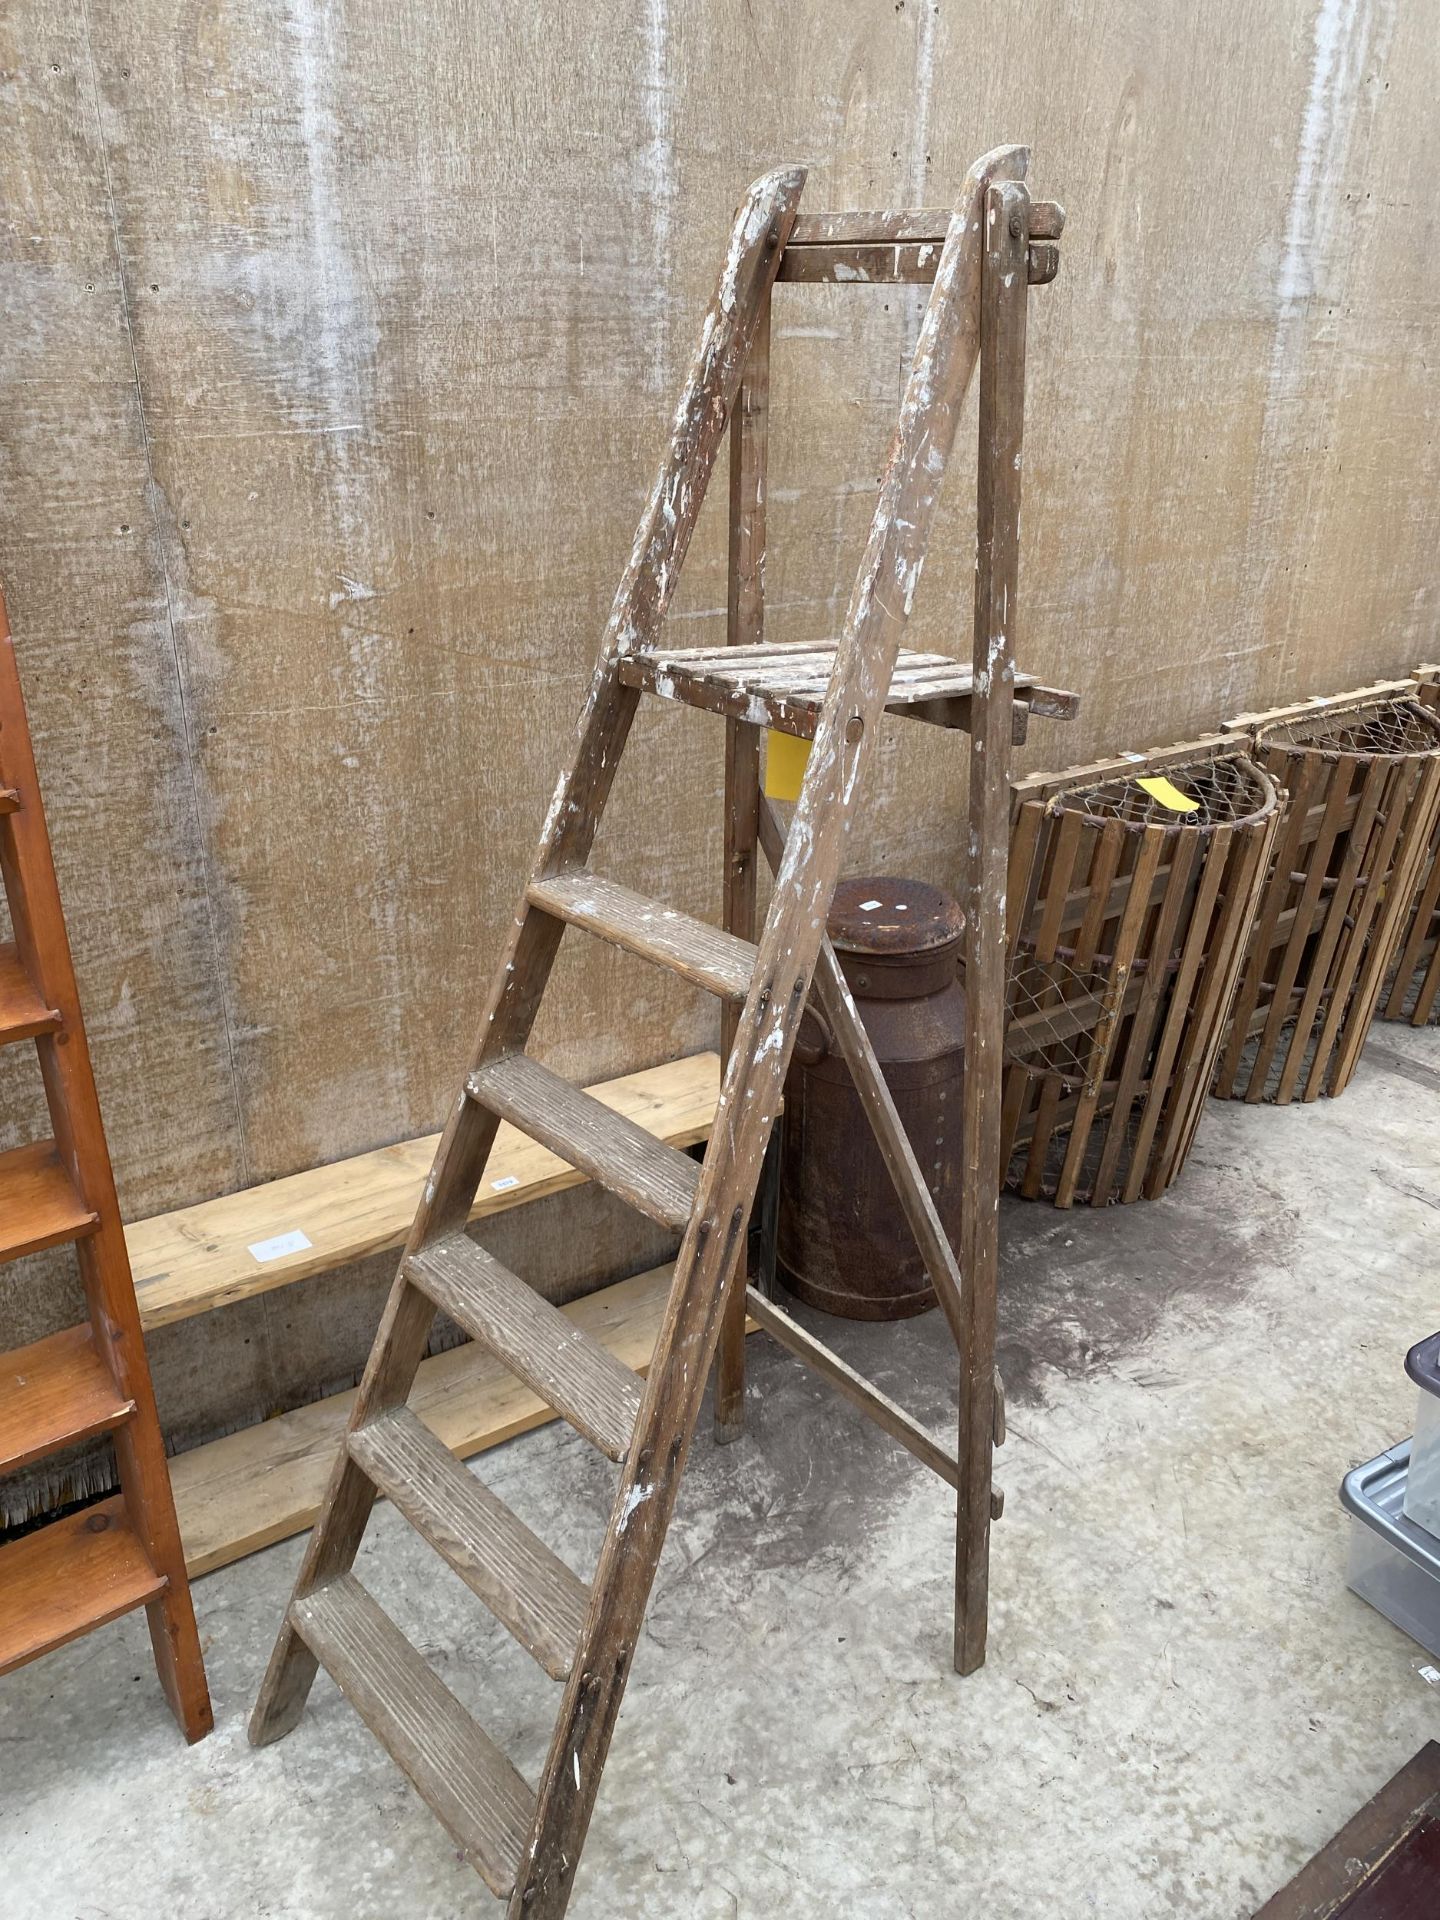 A WOODEN NINE RUNG LADDER AND A VINTAGE FIVE RUNG WOODEN STEP LADDER - Image 2 of 3